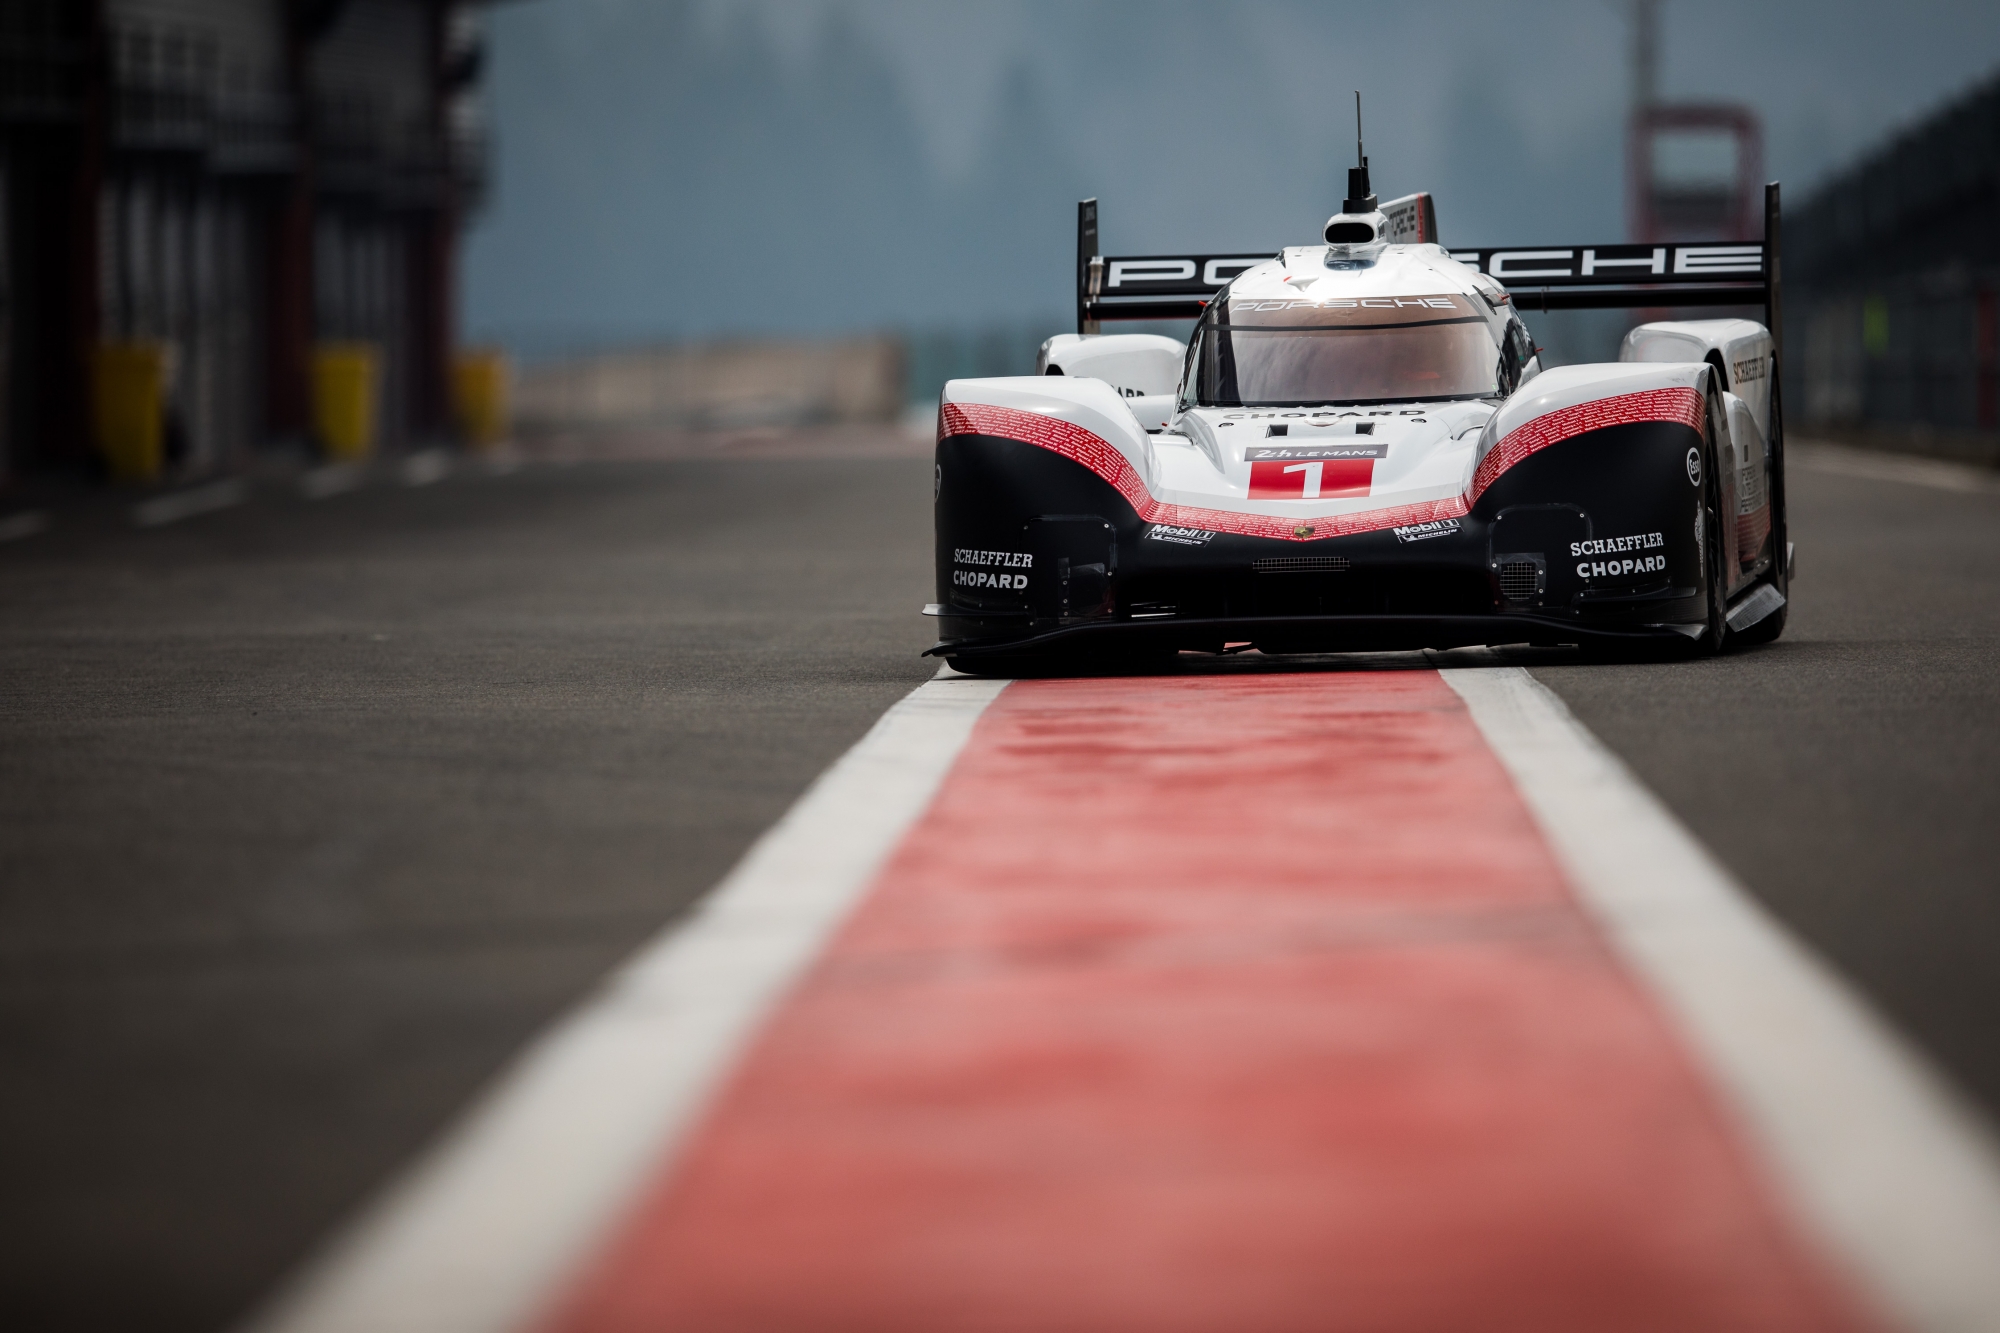 image 1 - The Porsche 919 Hybrid Evo demonstrates at the 25 Hours VW Fun Cup!